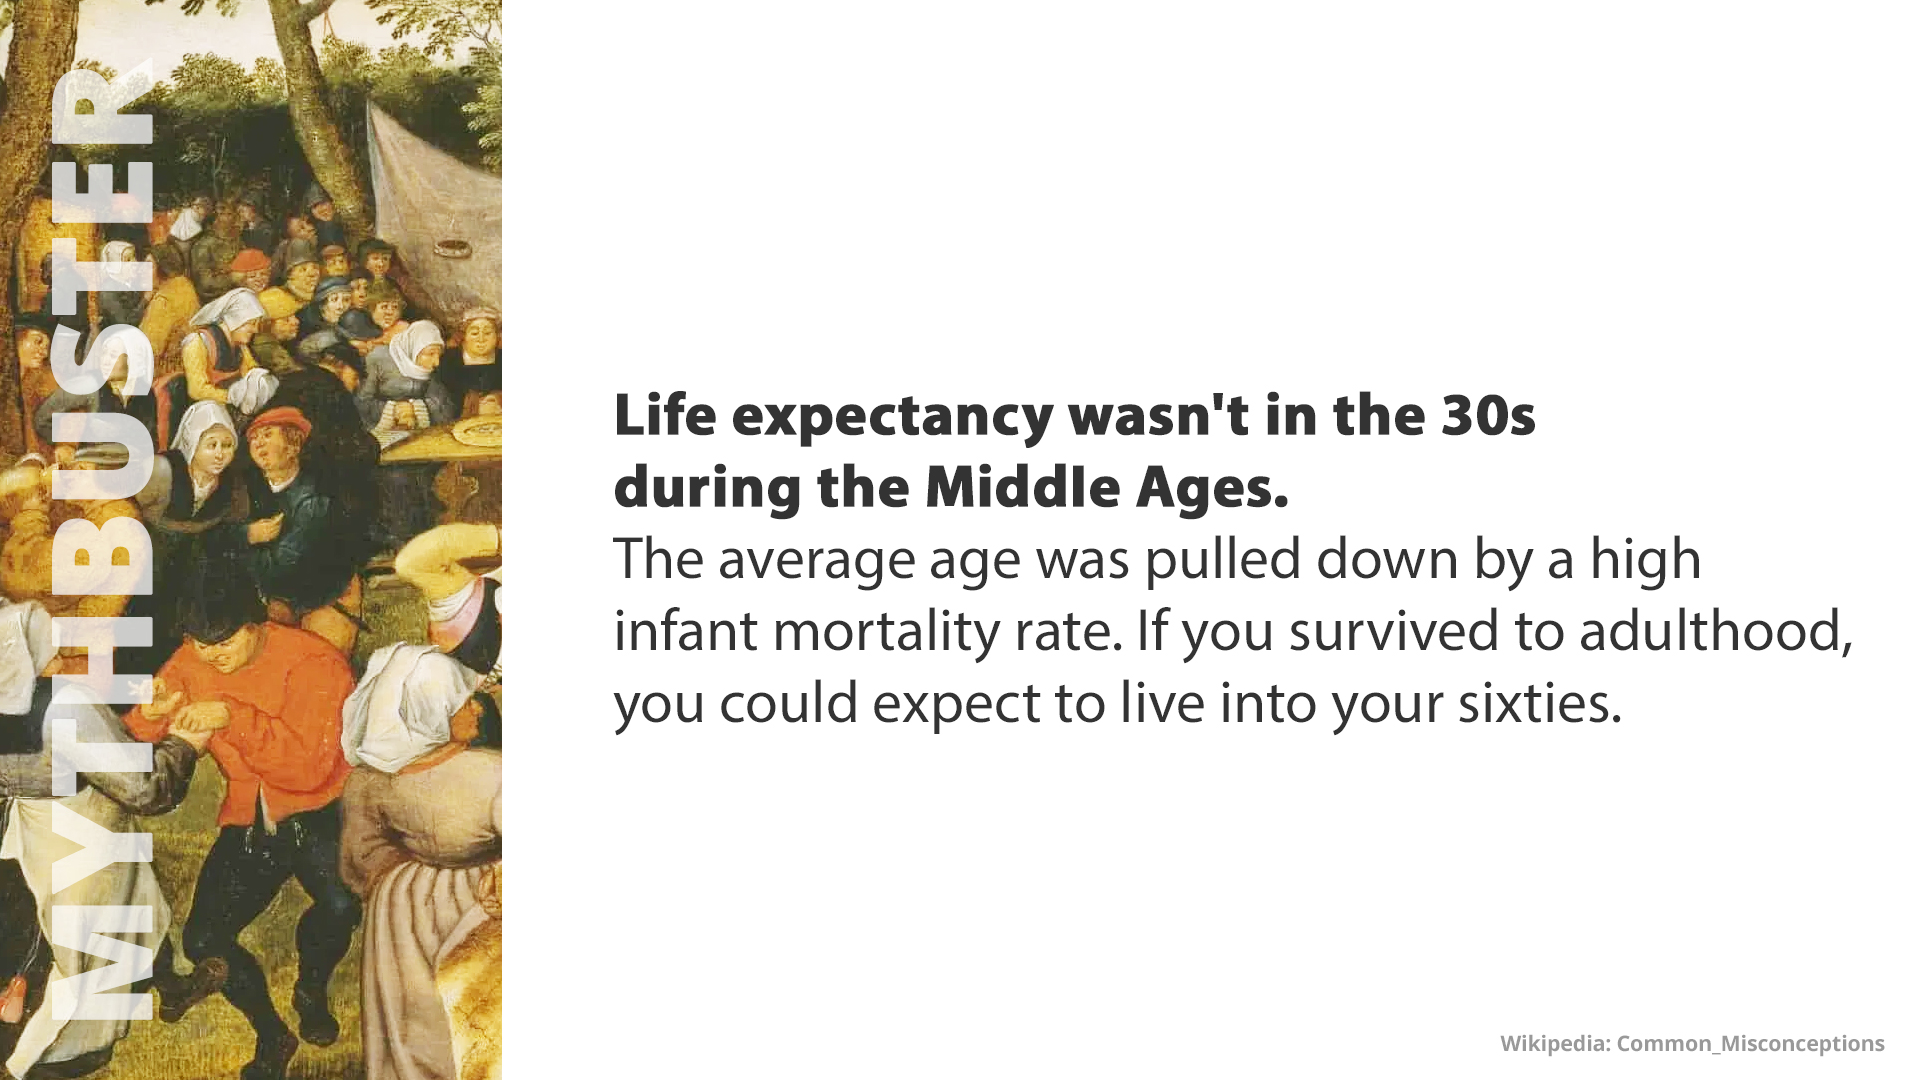 Free Graphic | Mythbusters | Life expectancy wasn't short in the Middle Ages